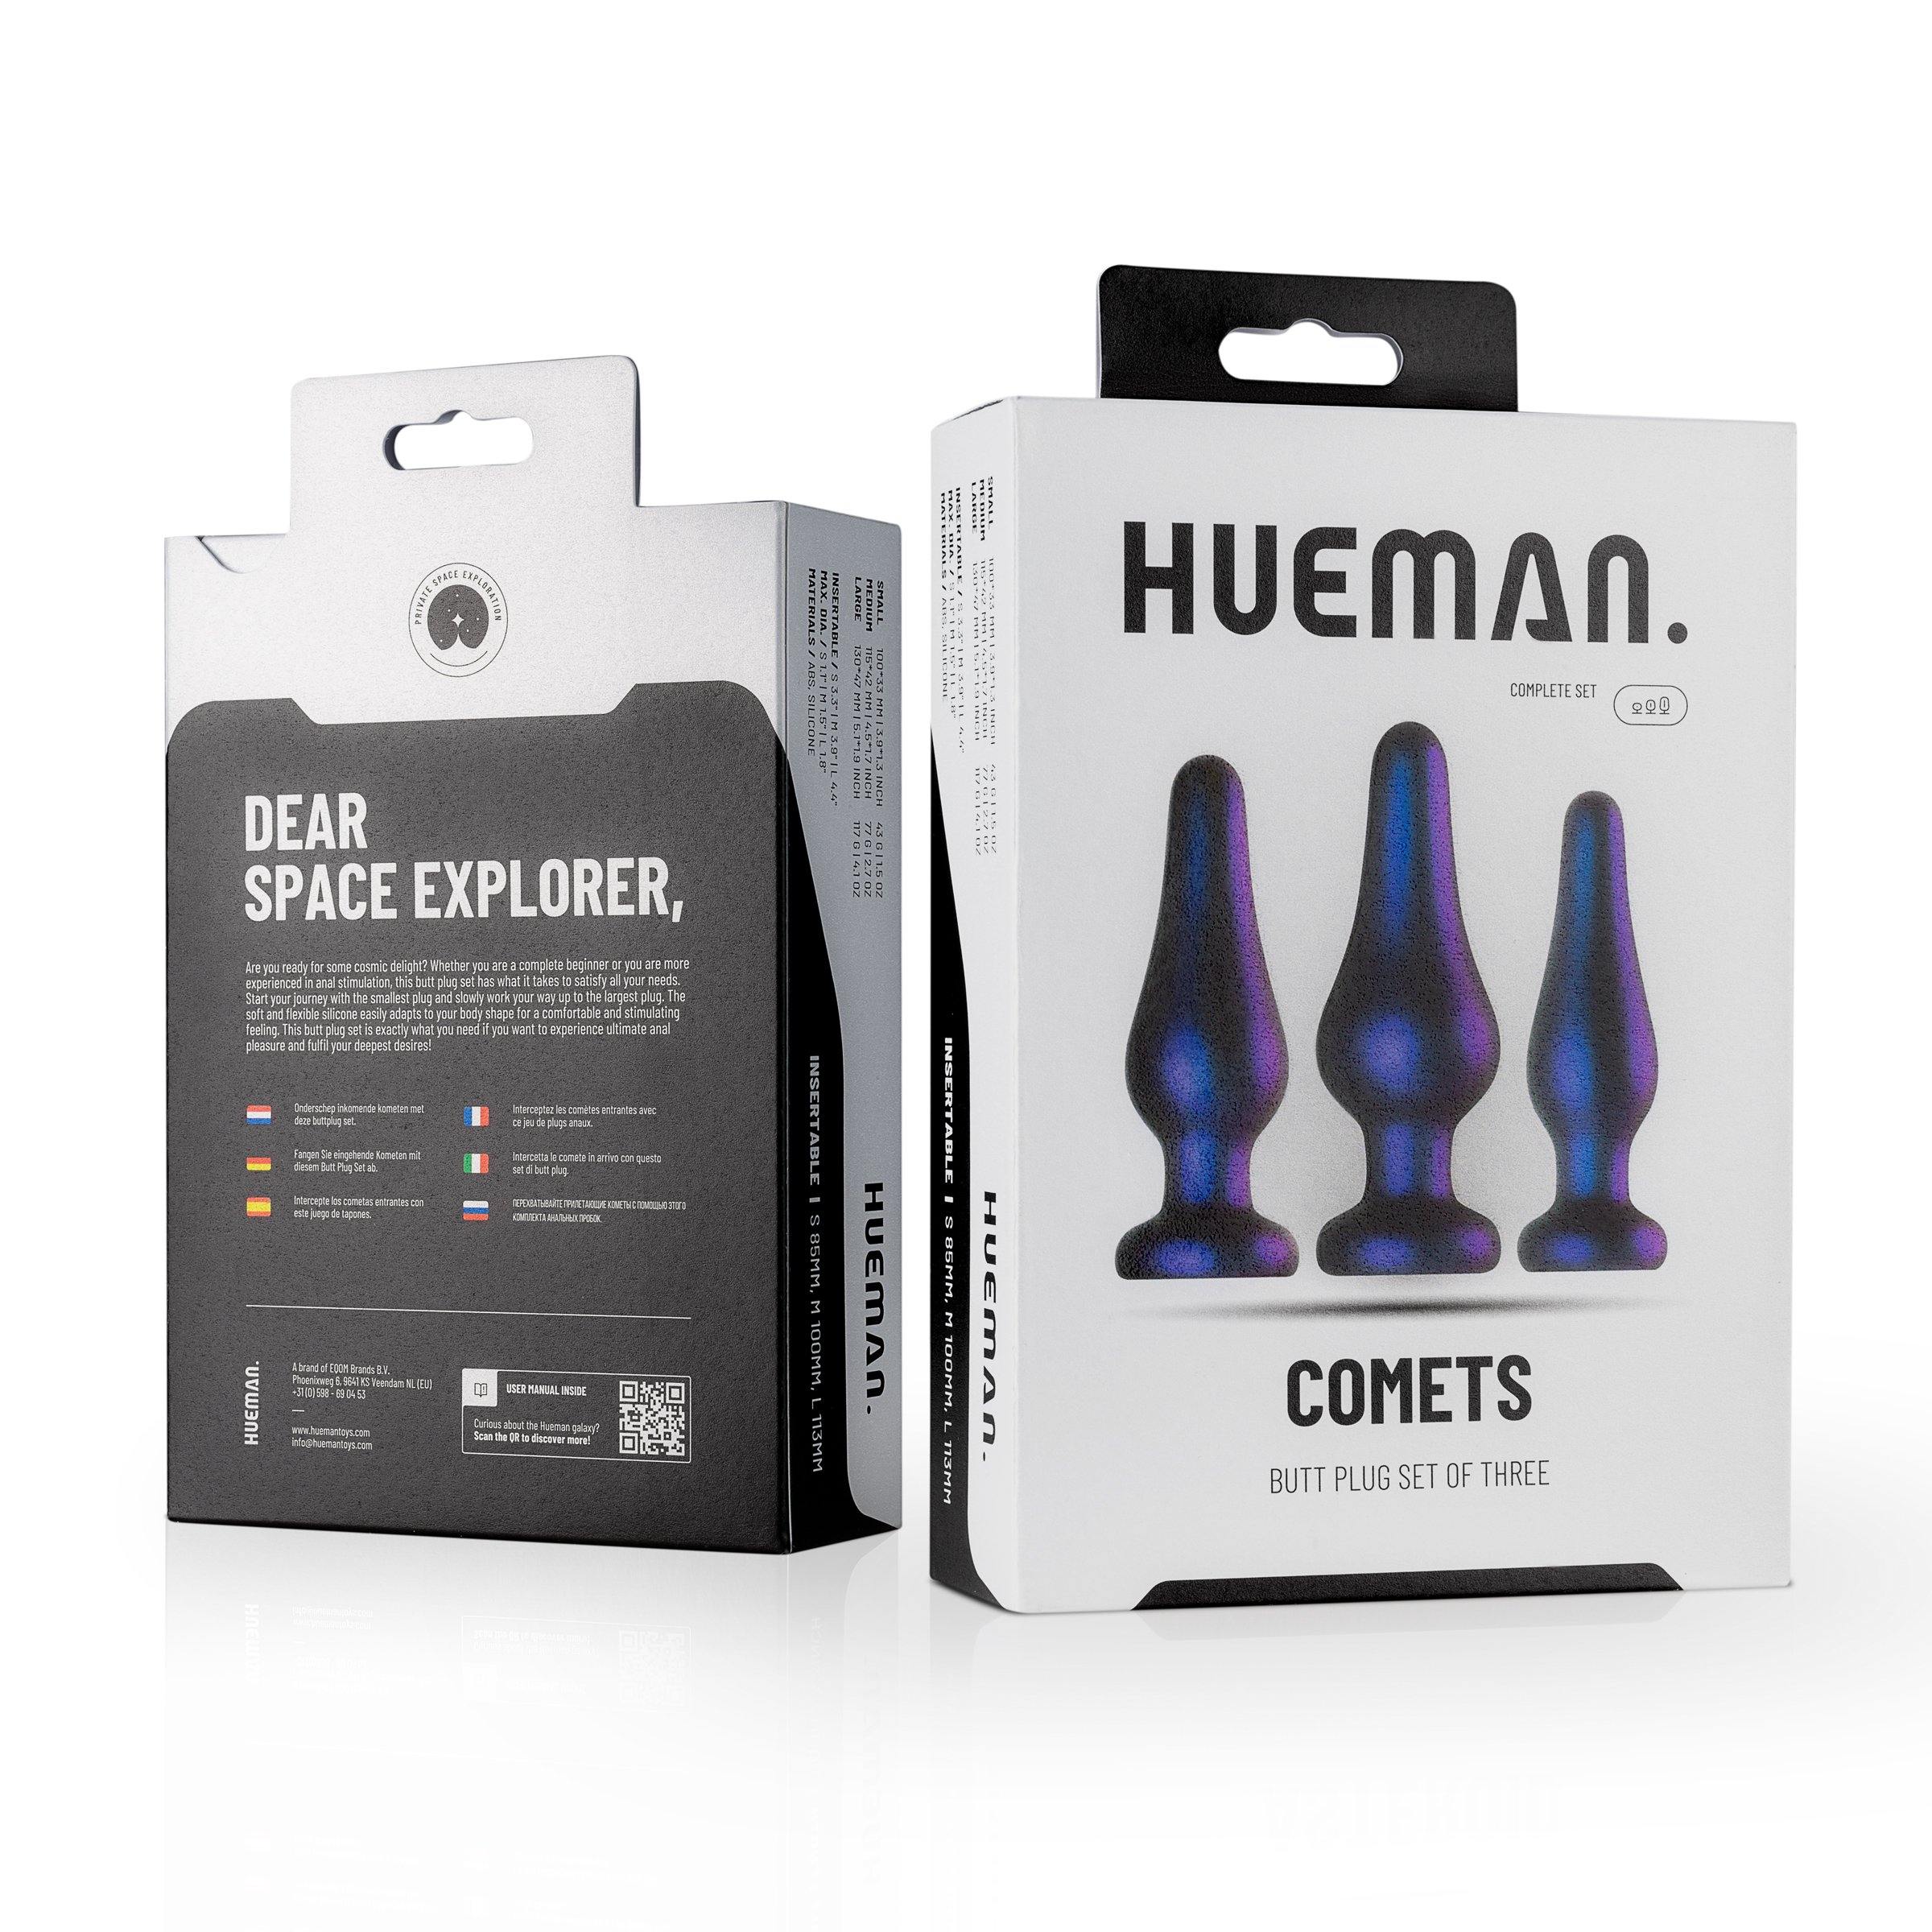 Hueman Comets Butt Plug Set - Buy At Luxury Toy X - Free 3-Day Shipping